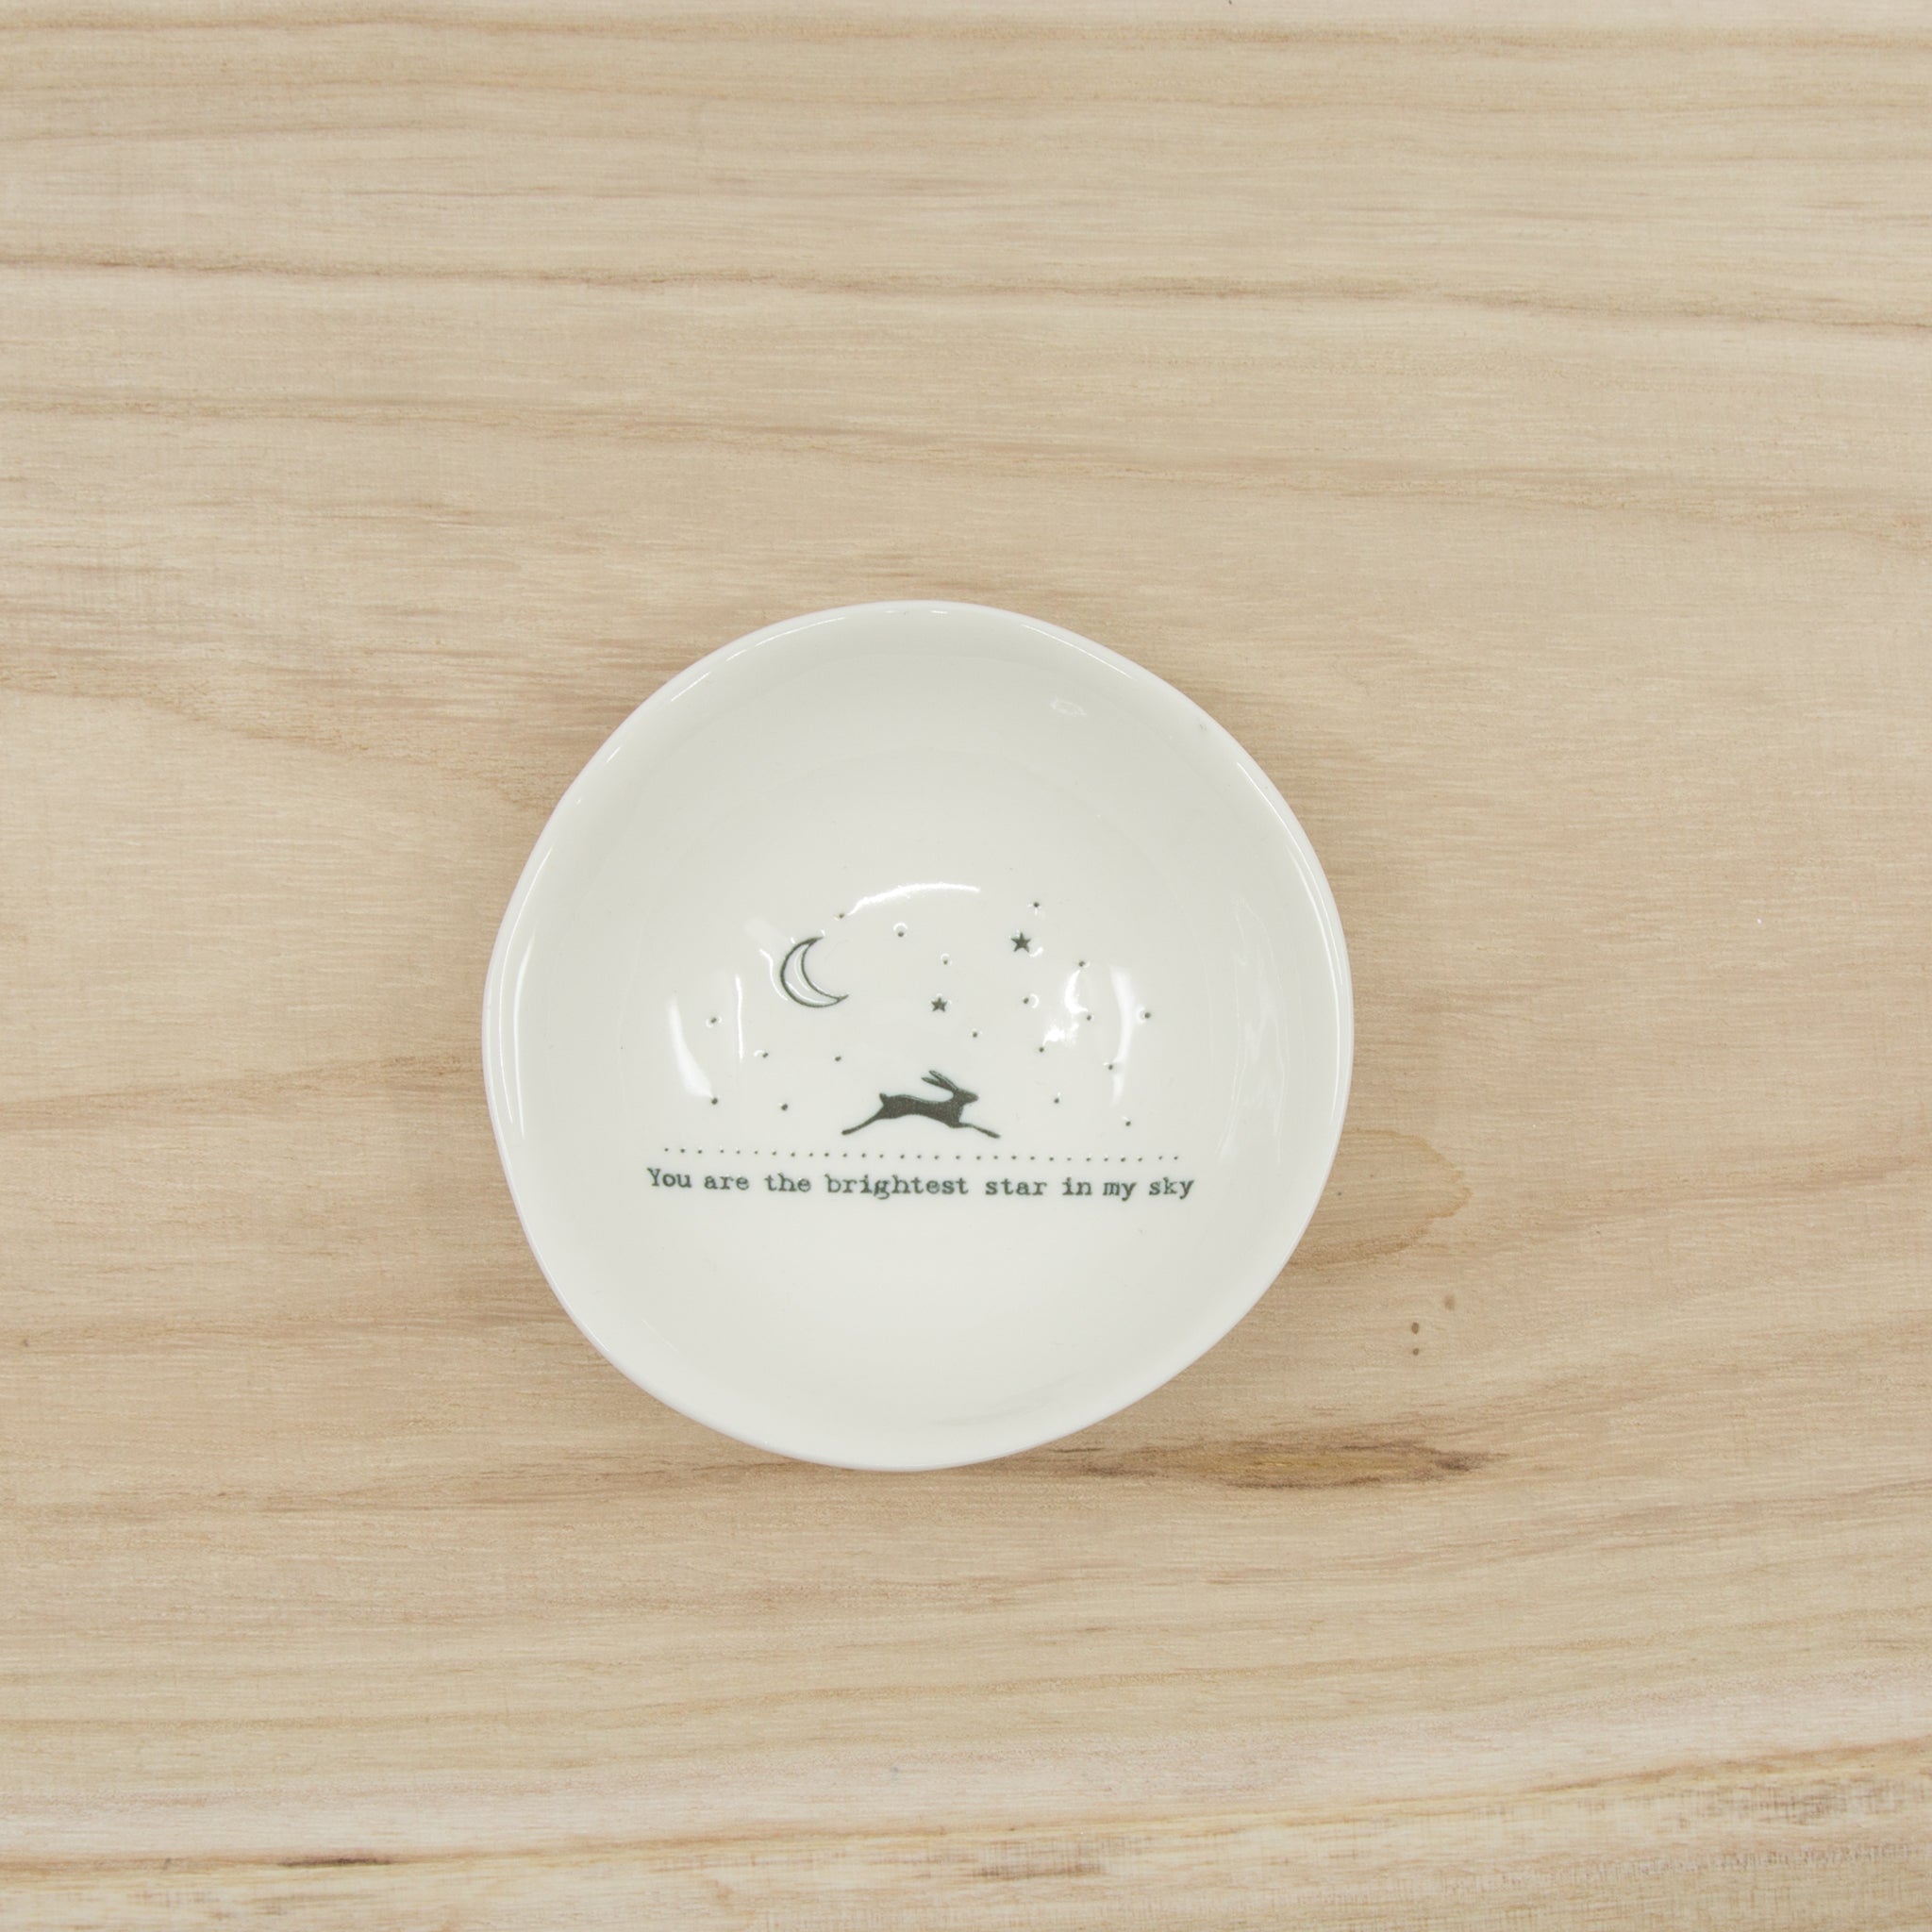 You are the brightest star in my sky - medium wobbly porcelain bowl